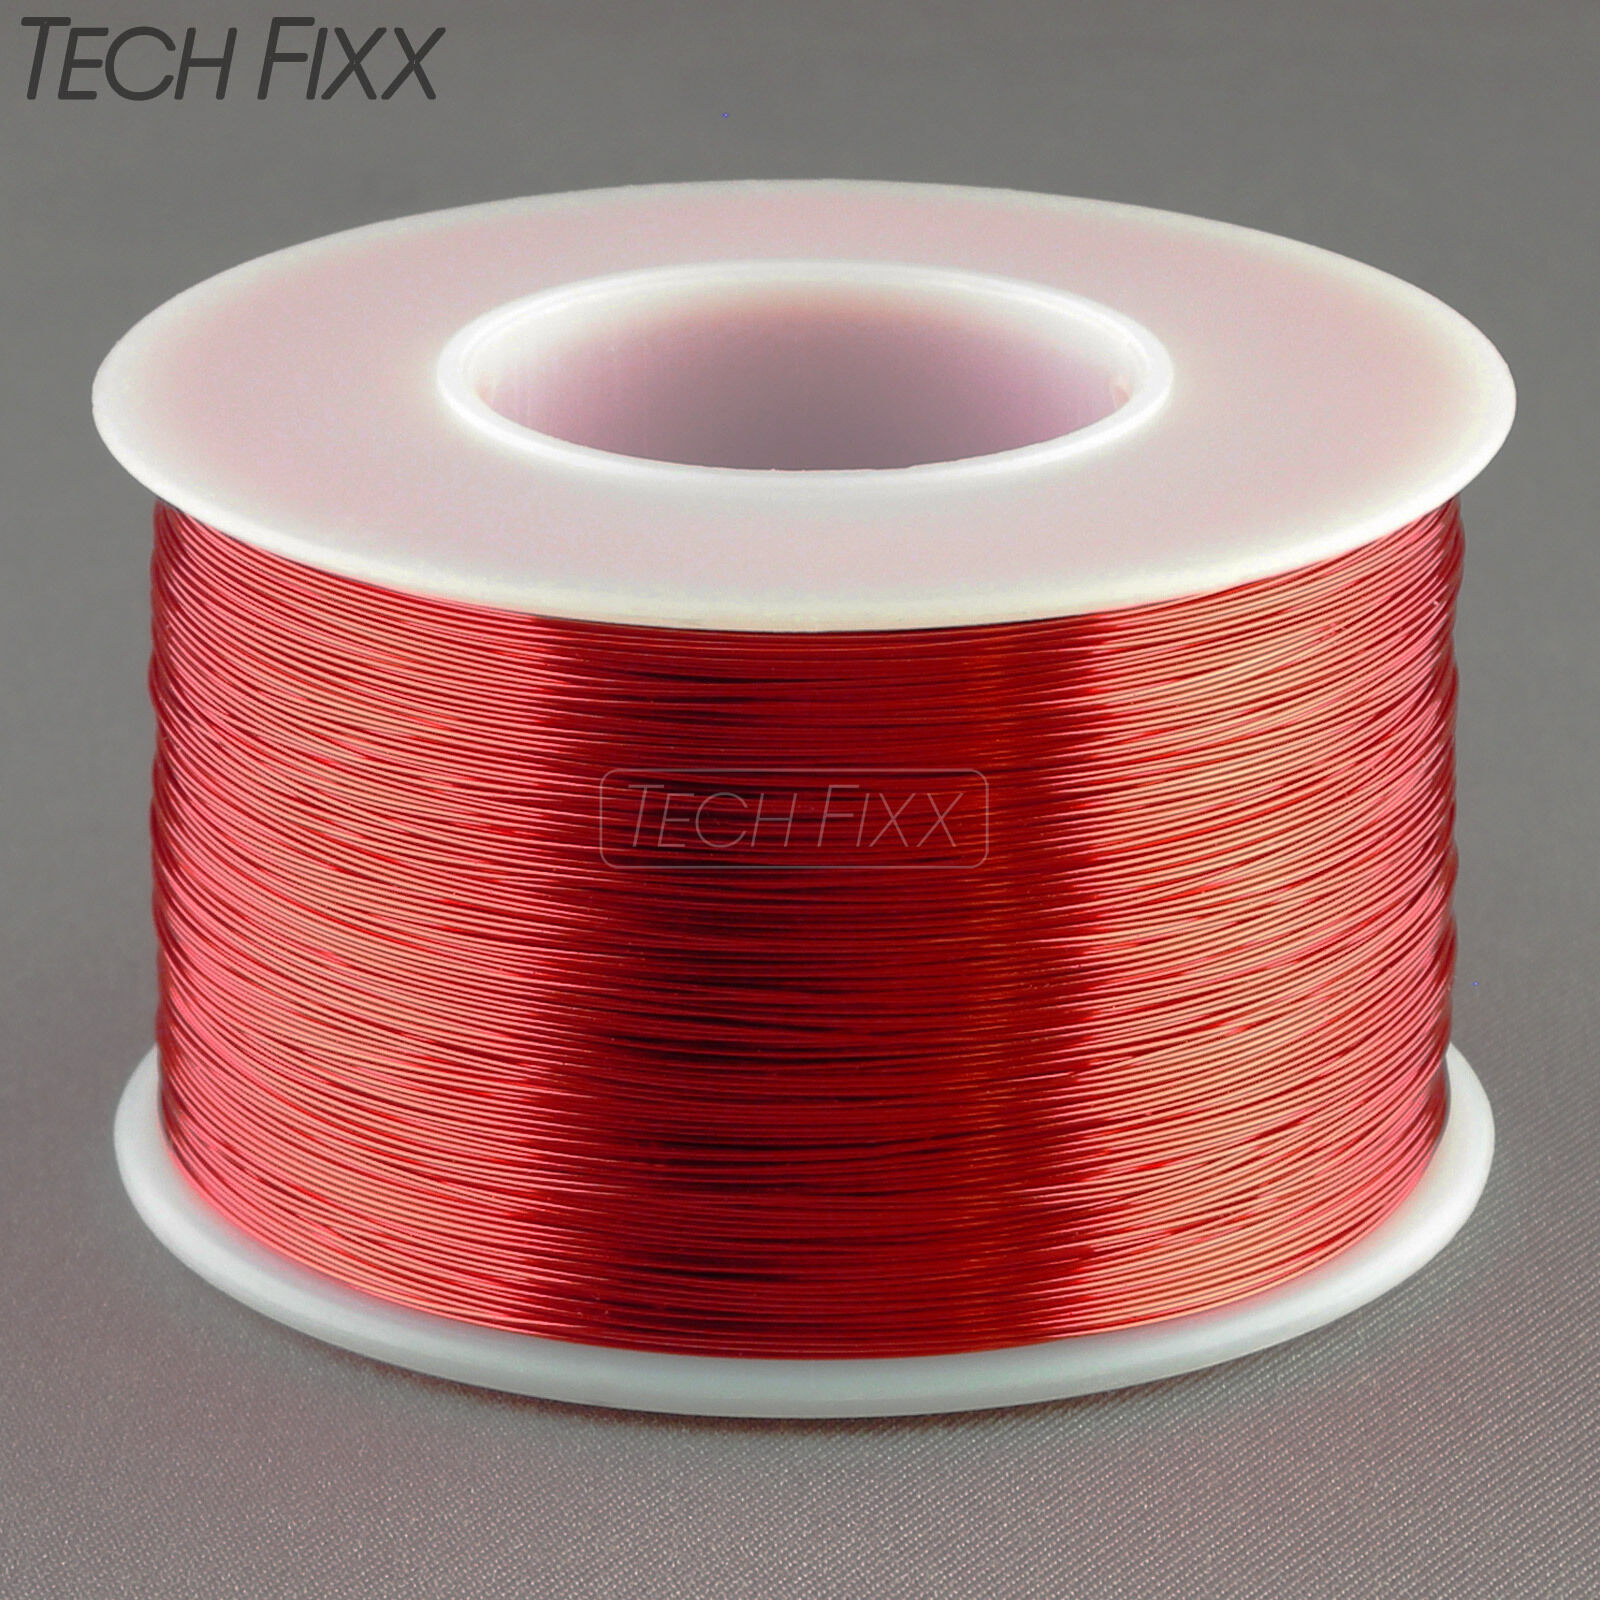 Magnet Wire 30 Gauge Awg Enameled Copper 1570 Feet Coil Winding And Crafts Red